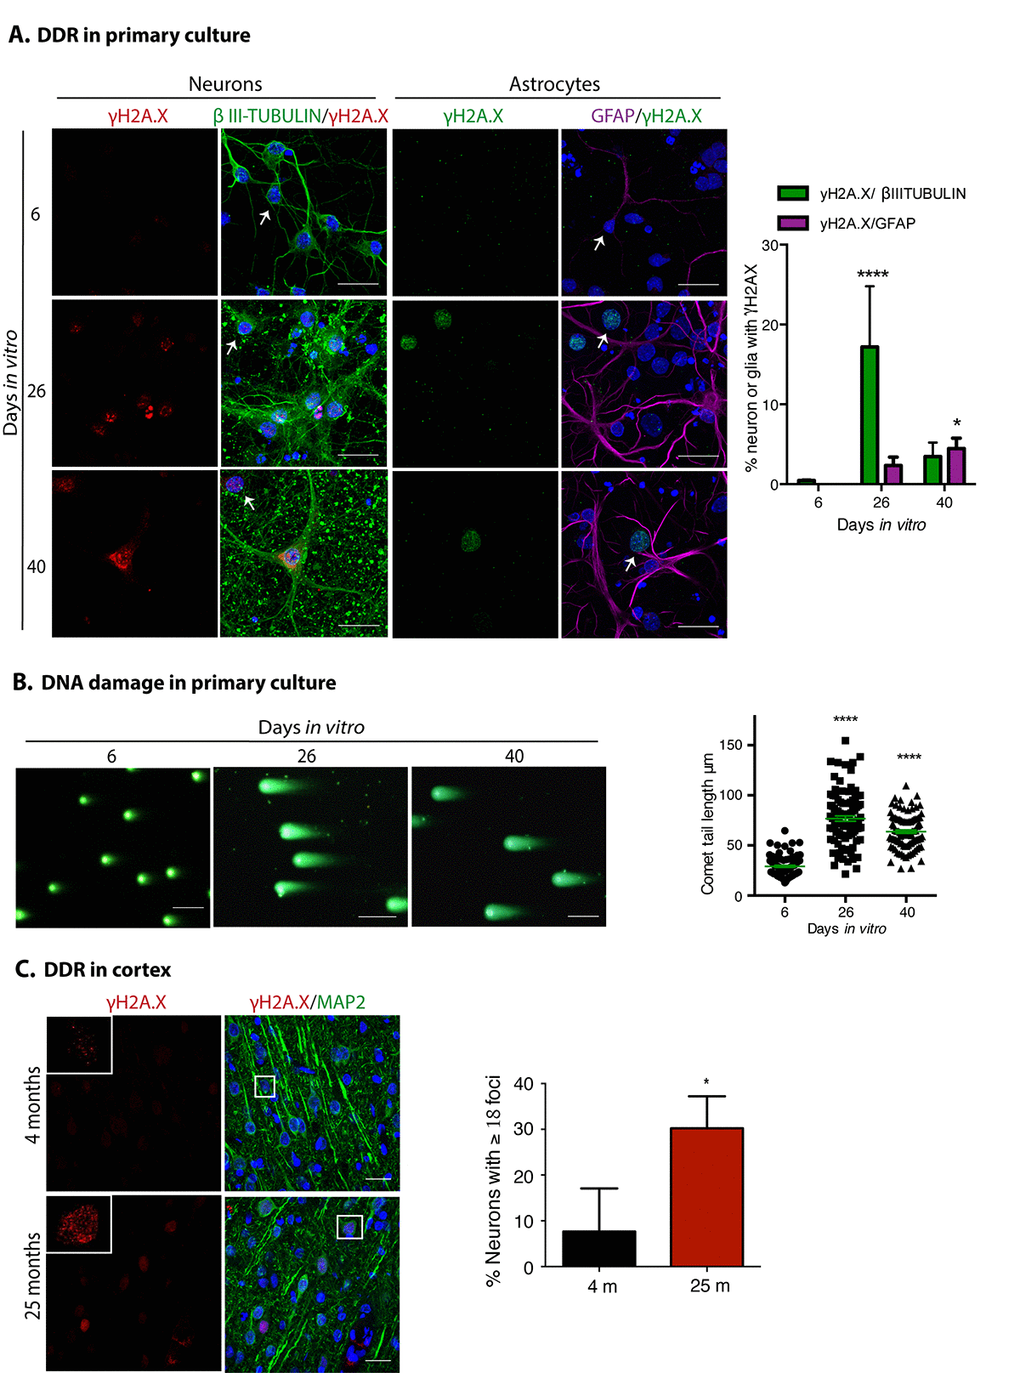 Neuronal cells in cortical long-term culture and in the cortex from old rat brains had a sustained DNA damage response (DDR). (A) Immunofluorescence to detect γH2AX foci in neurons (expressing βIII-TUBULIN) or astrocytes (expressing GFAP) in primary culture of cortical cells incubated during the indicated DIV. Notice that mostly neurons have γH2AX foci at 26 DIV. Scale bar represents 25 μm. Right, quantification of the percentage of neurons or glial cells with γH2AX foci over all cells. The mean of three independent experiments, each done by duplicate, is plotted. Bars represent SEM. Two-way RM ANOVA analysis, with Dunnett´s multiple comparison test. **** pIV vs. 6 DIV; * pIV vs. 6 DIV. Arrows indicate examples of cells with healthy nuclei counted (not all the healthy cells are indicated). (B) Comet assay to detect double strand breaks in genomic DNA from cells collected at the indicated days. Scale bars represent 100 μm. Right, the length of the tail of the comets, indicative of level of DNA damage, is plotted. 50 nuclei from each treatment, from two independent experiments, were analyzed by RM one-way ANOVA with Dennett’s´ multiple comparison. **** pIV or 40 DIV in comparison with 6 DIV. (C) Immunofluorescence to detect γH2AX foci in cortical neurons (expressing MAP2) in rat brains from the indicated age. Nuclei were stained with DAPI. Scale bars represent 30 μm. Right, percentage of neurons with more than 18 foci per nucleus. More than 100 neurons were counted from 3 different brains of each age. Bars represent standard deviation. Unpaired t Test * p